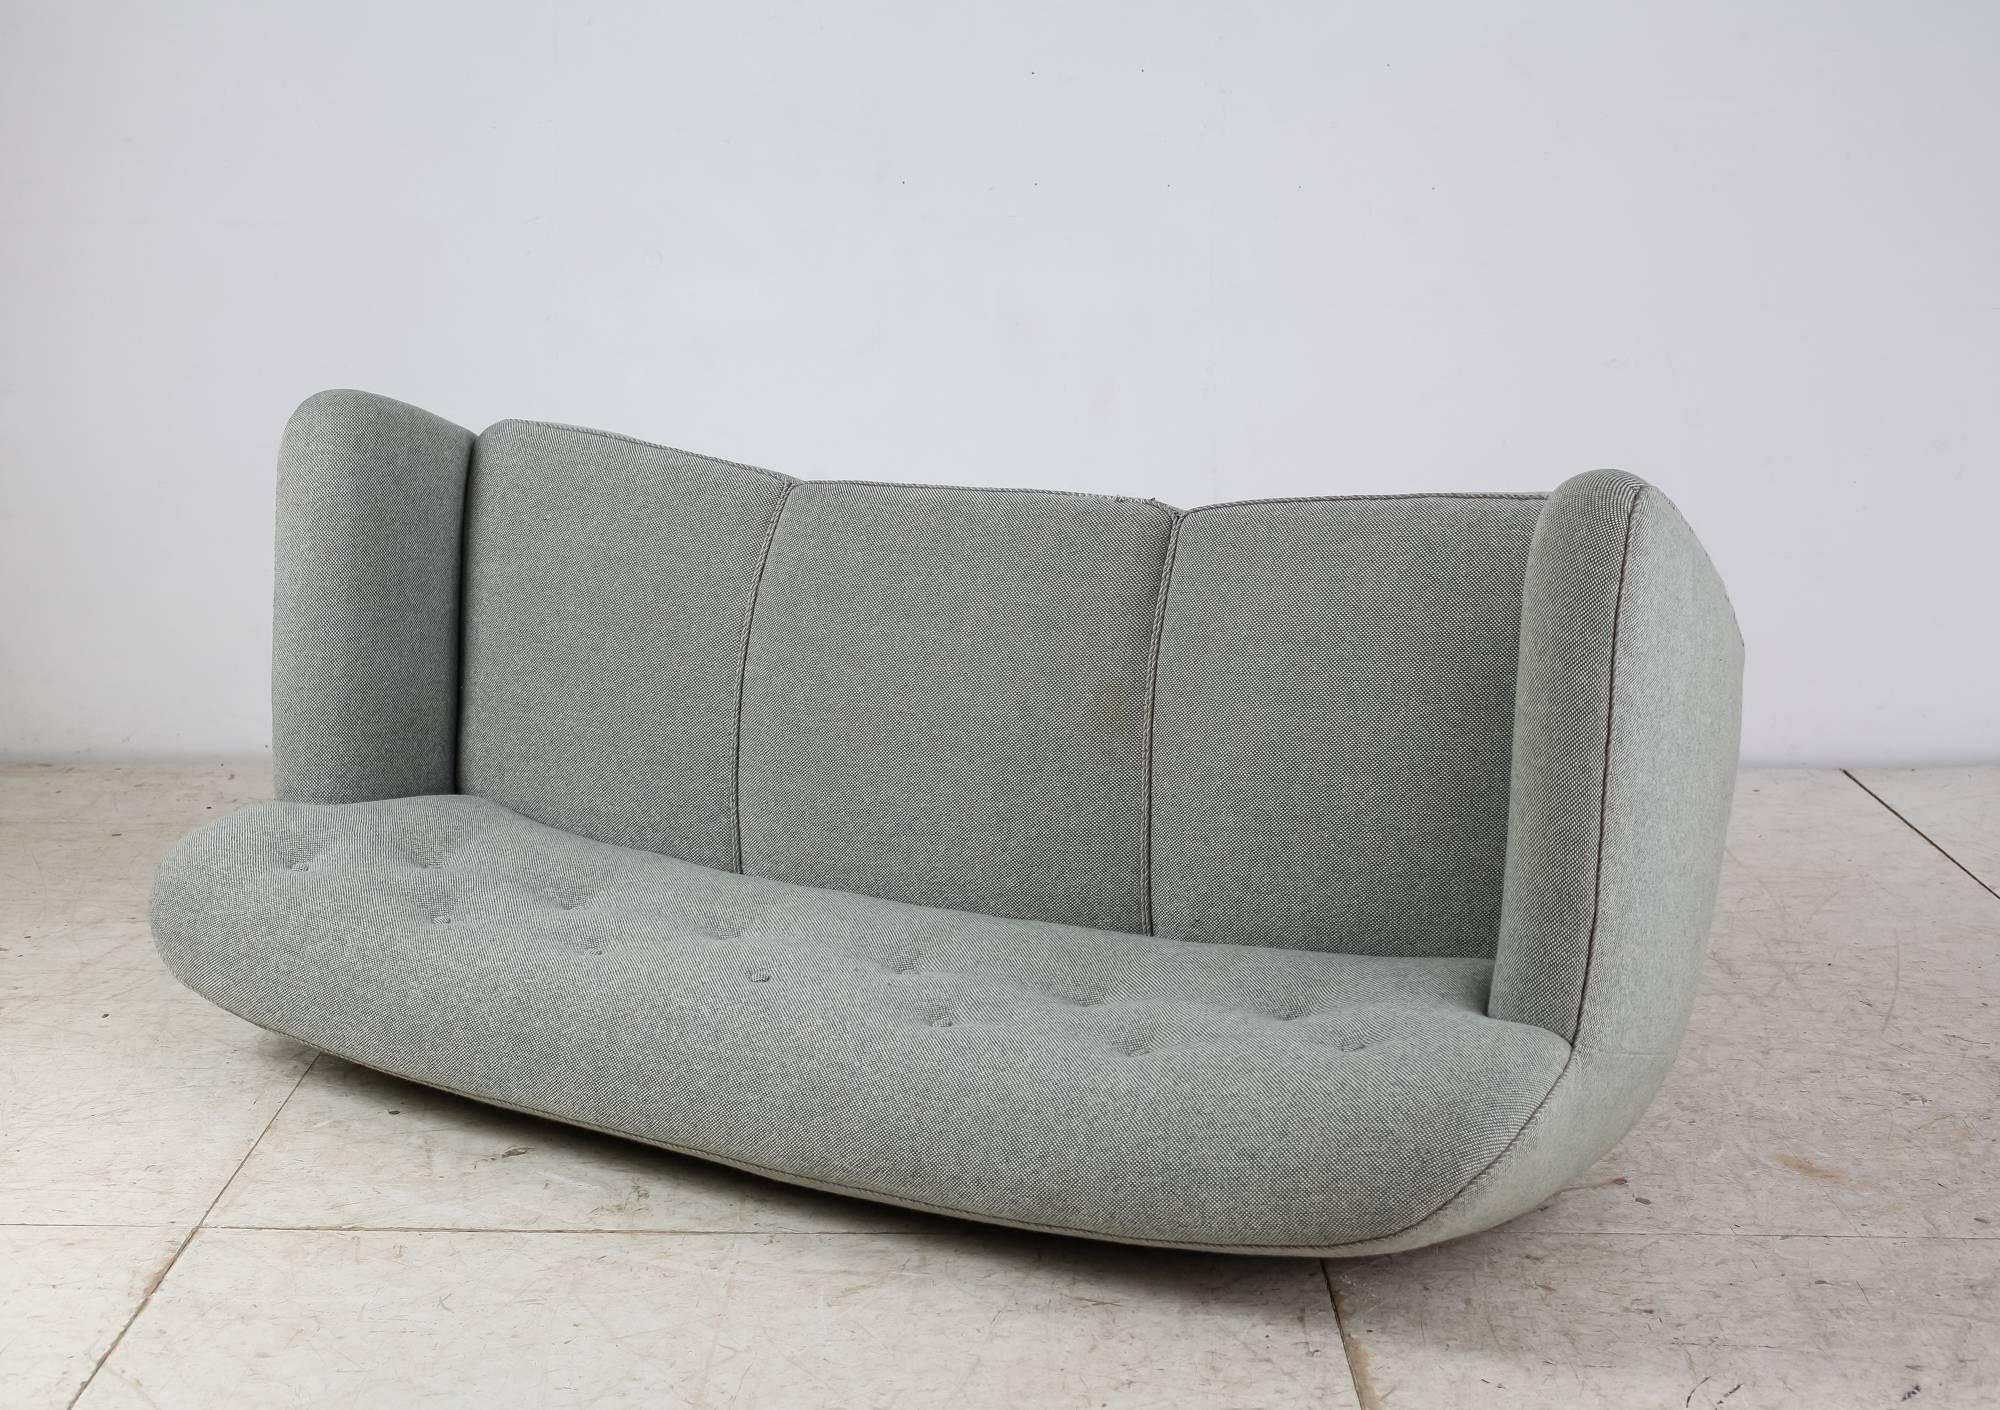 Mid-20th Century Curved Three-Seat Sofa with Light Blue Fabric Upholstery, Denmark, 1930s For Sale